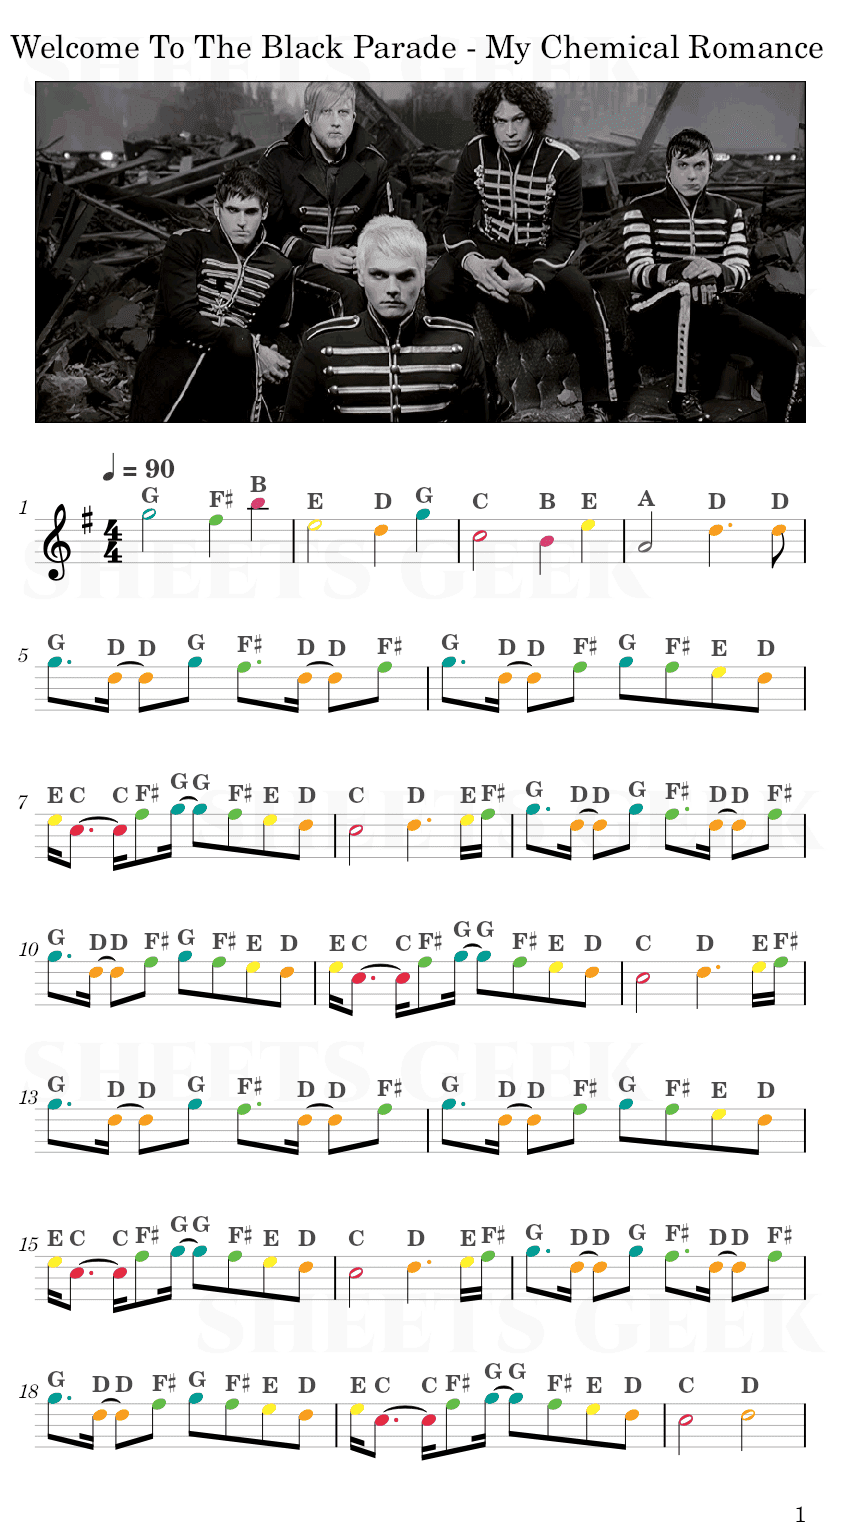 Welcome To The Black Parade - My Chemical Romance Easy Sheet Music Free for piano, keyboard, flute, violin, sax, cello page 1